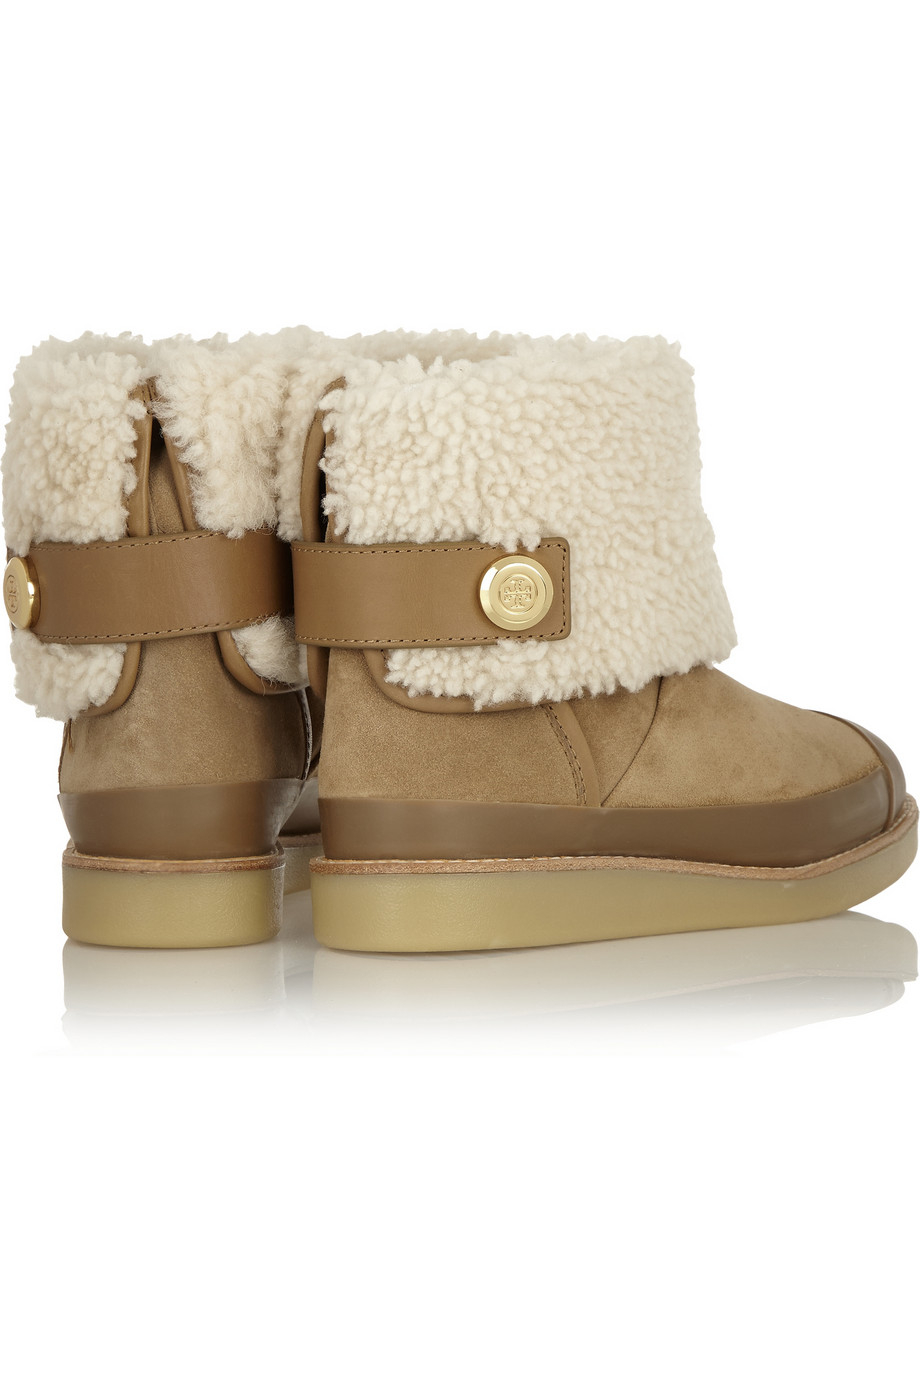 Tory Burch Ugg Boots Online Sale, UP TO 60% OFF